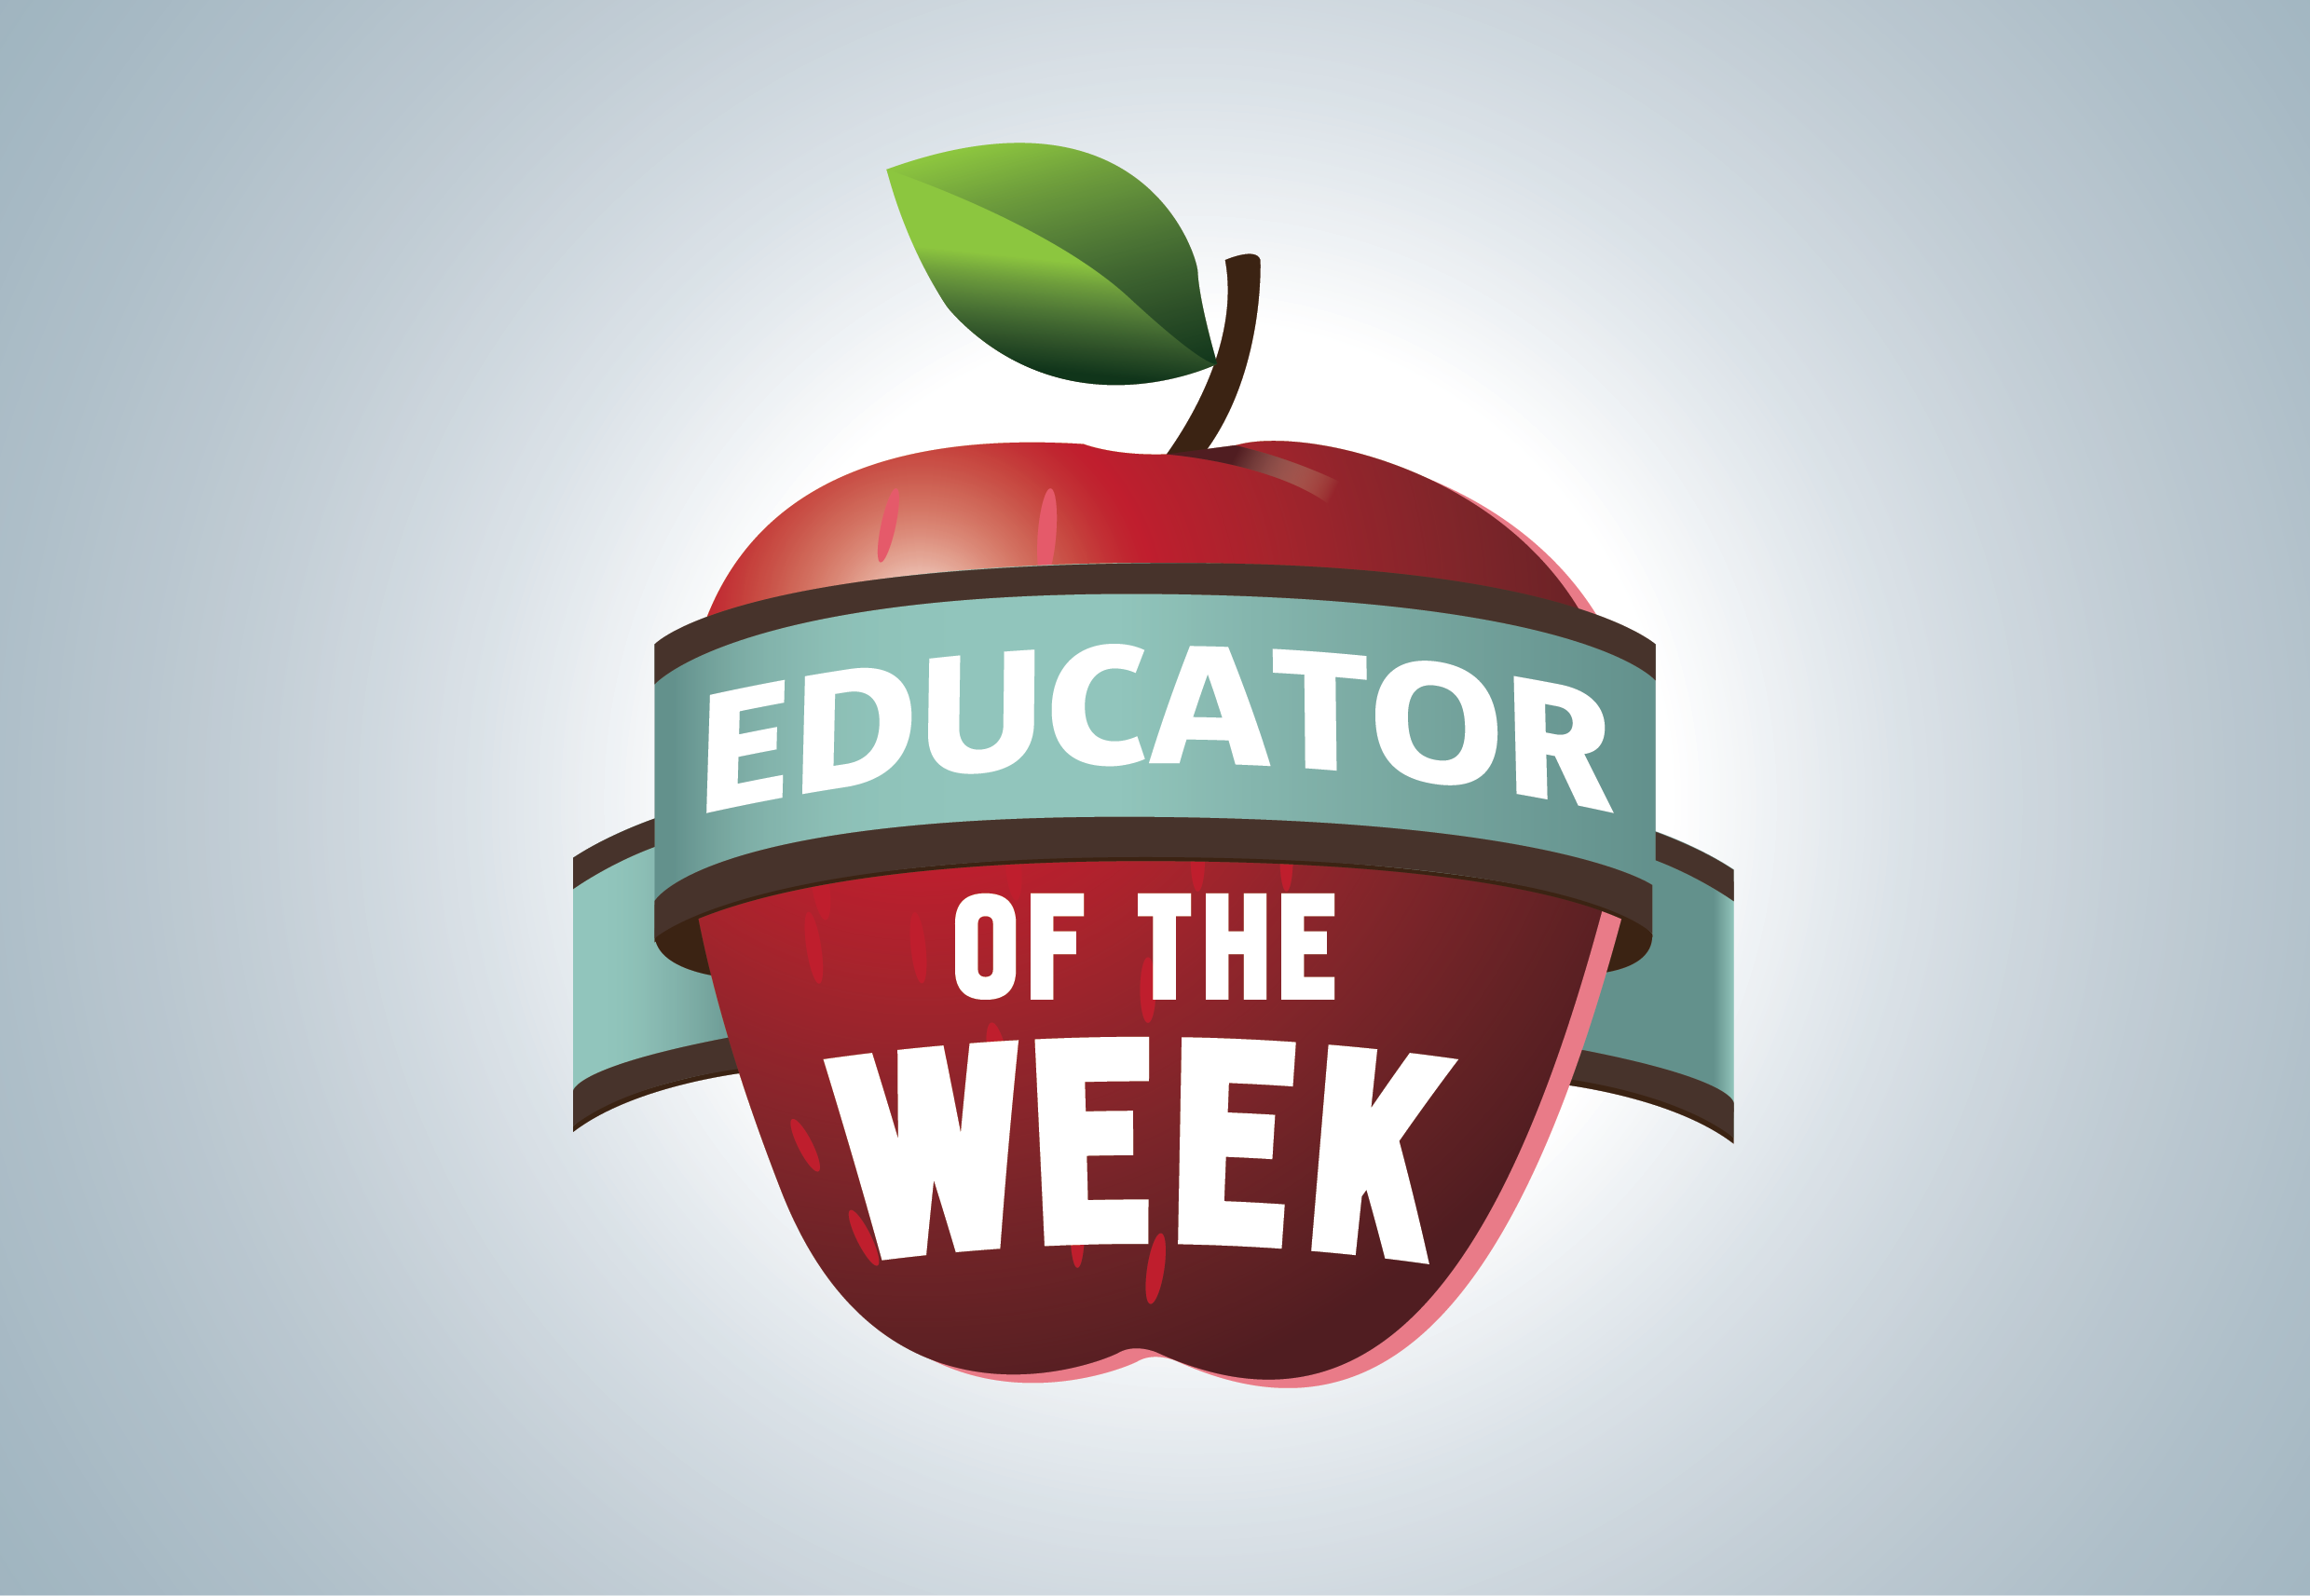 Submit your nominations for the Educator of the Week